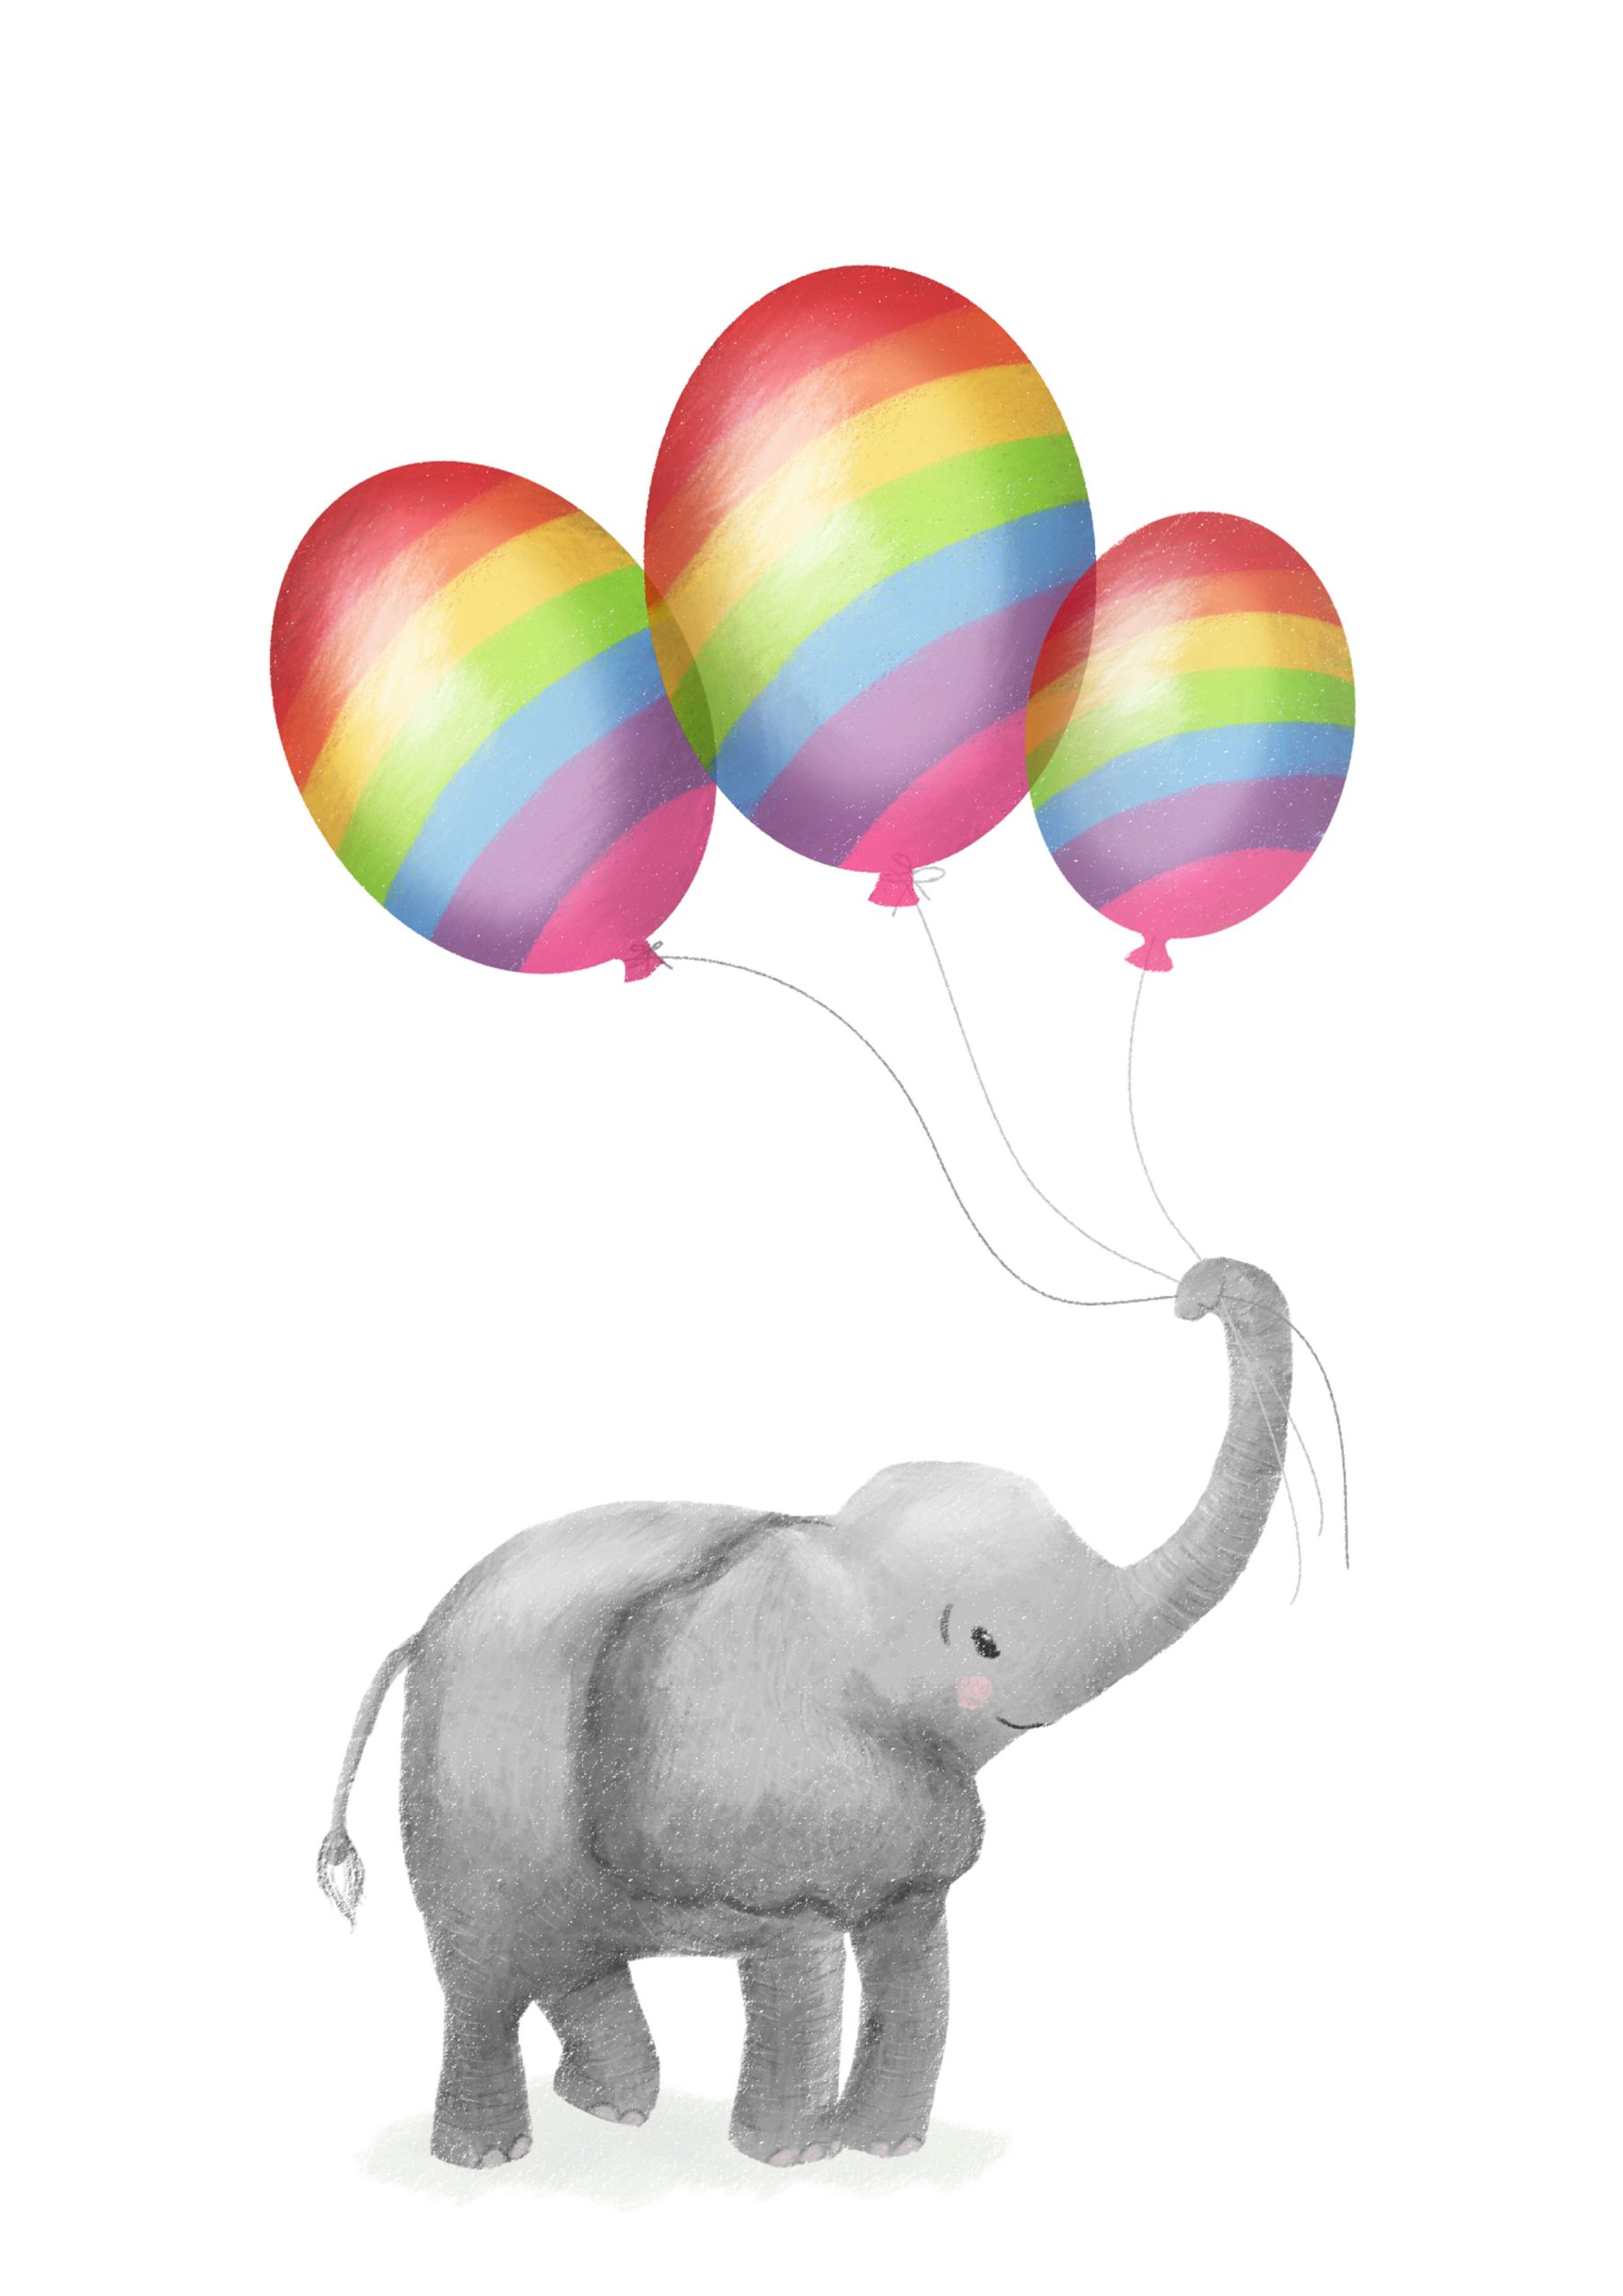 Baby elephant holding rainbow balloons in his trunk